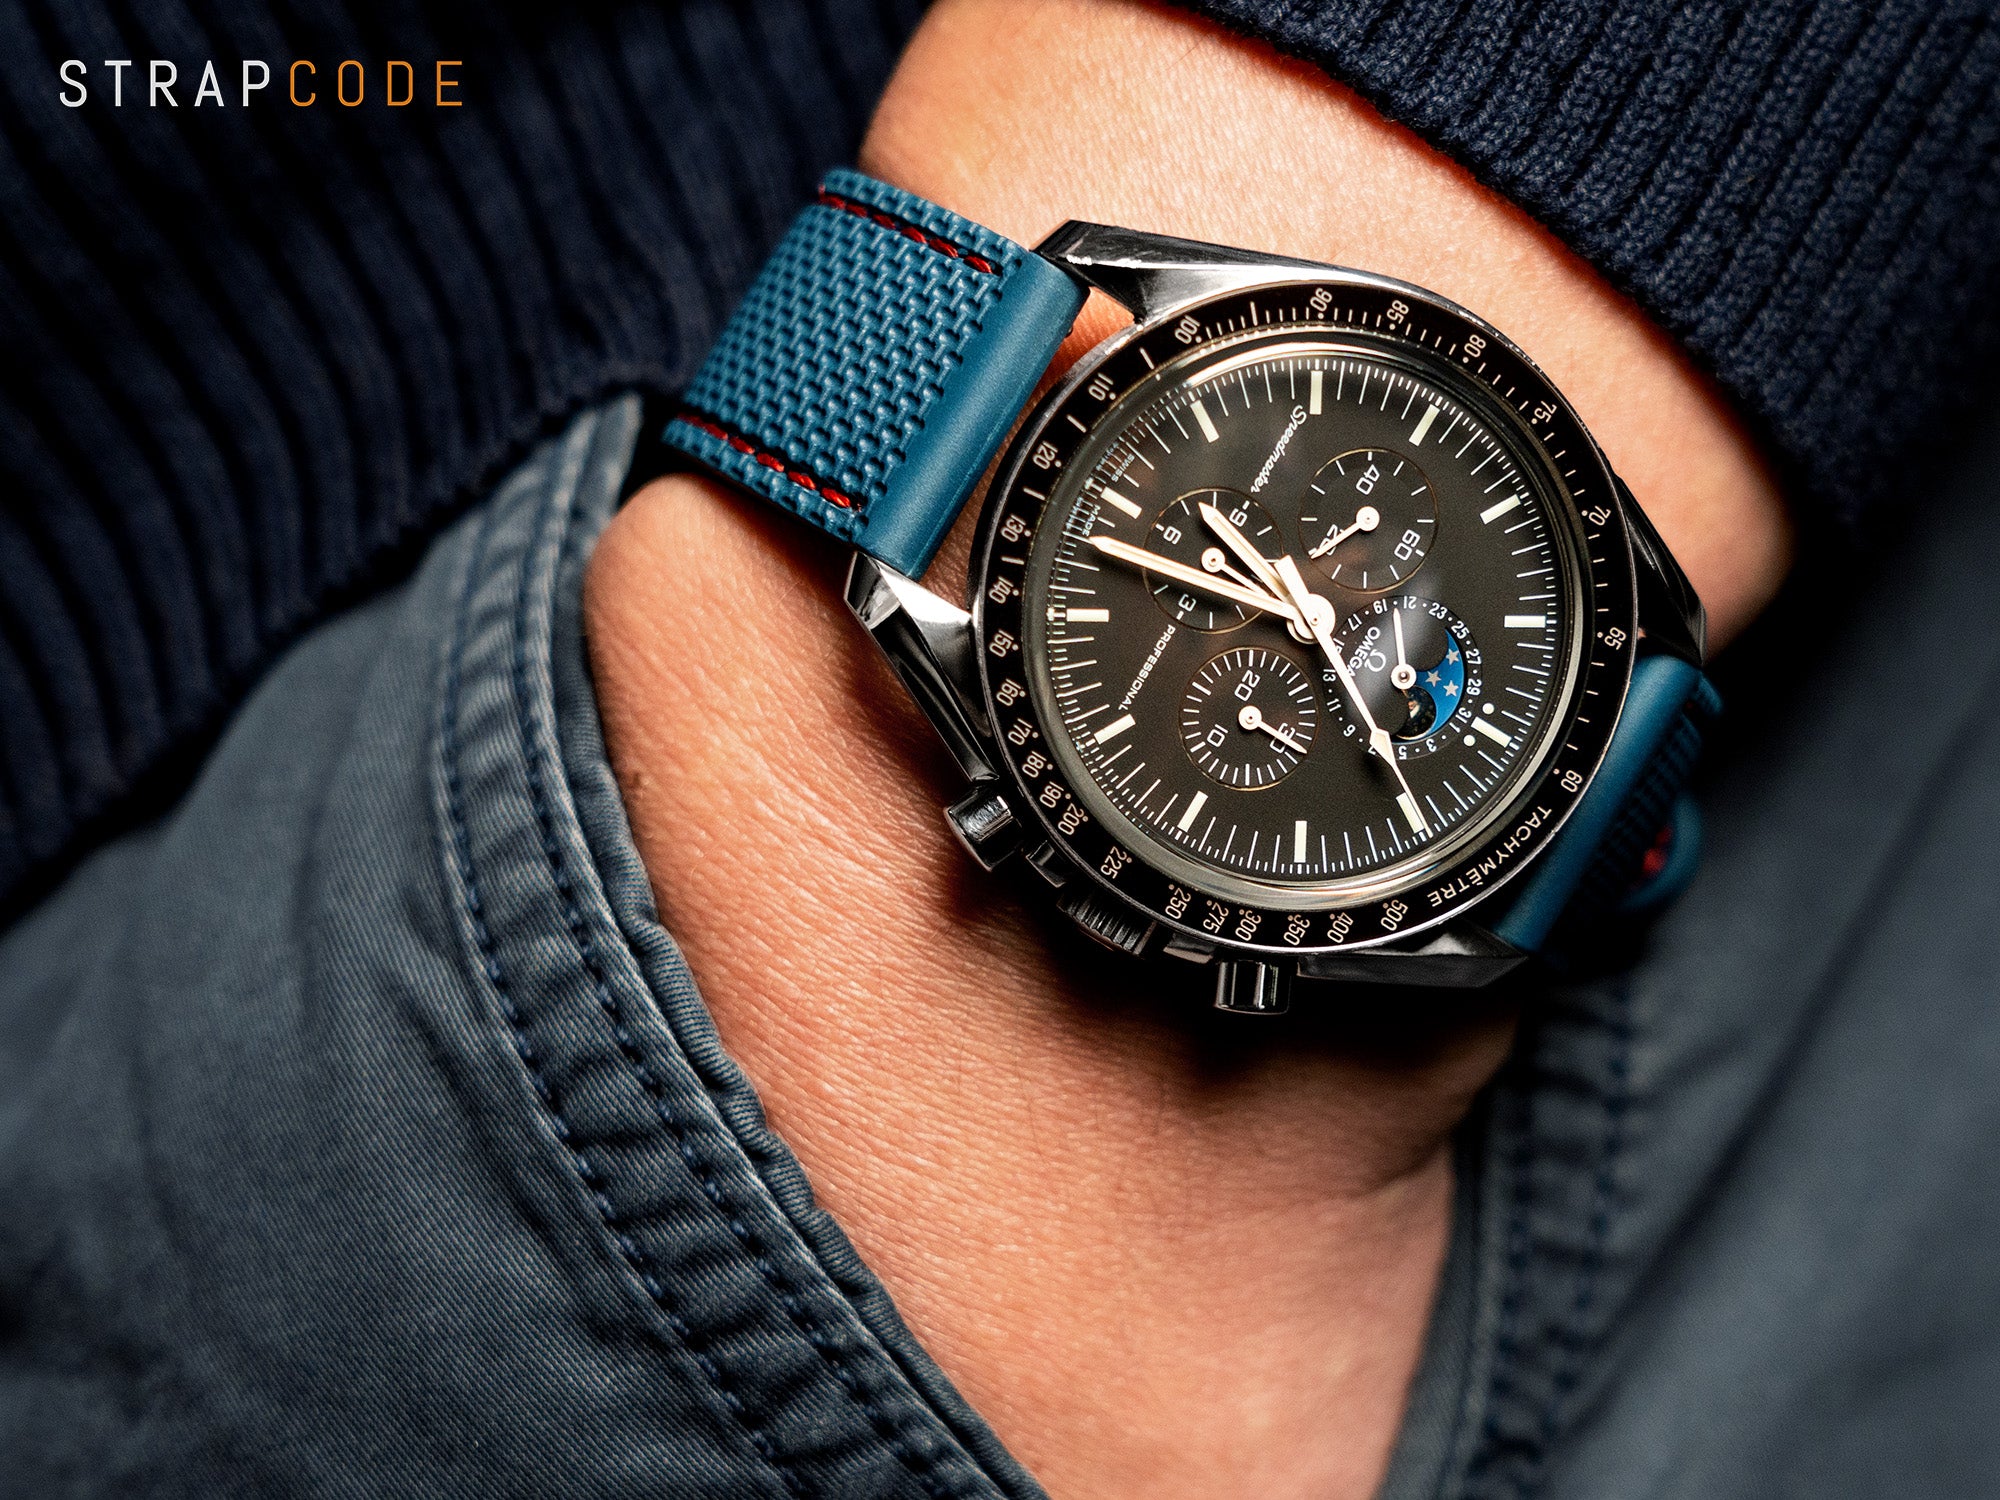 Omega SpeedyMoon paired with a Q.R. Performance FKM Rubber Strap by Crafter Blue, Strapcode